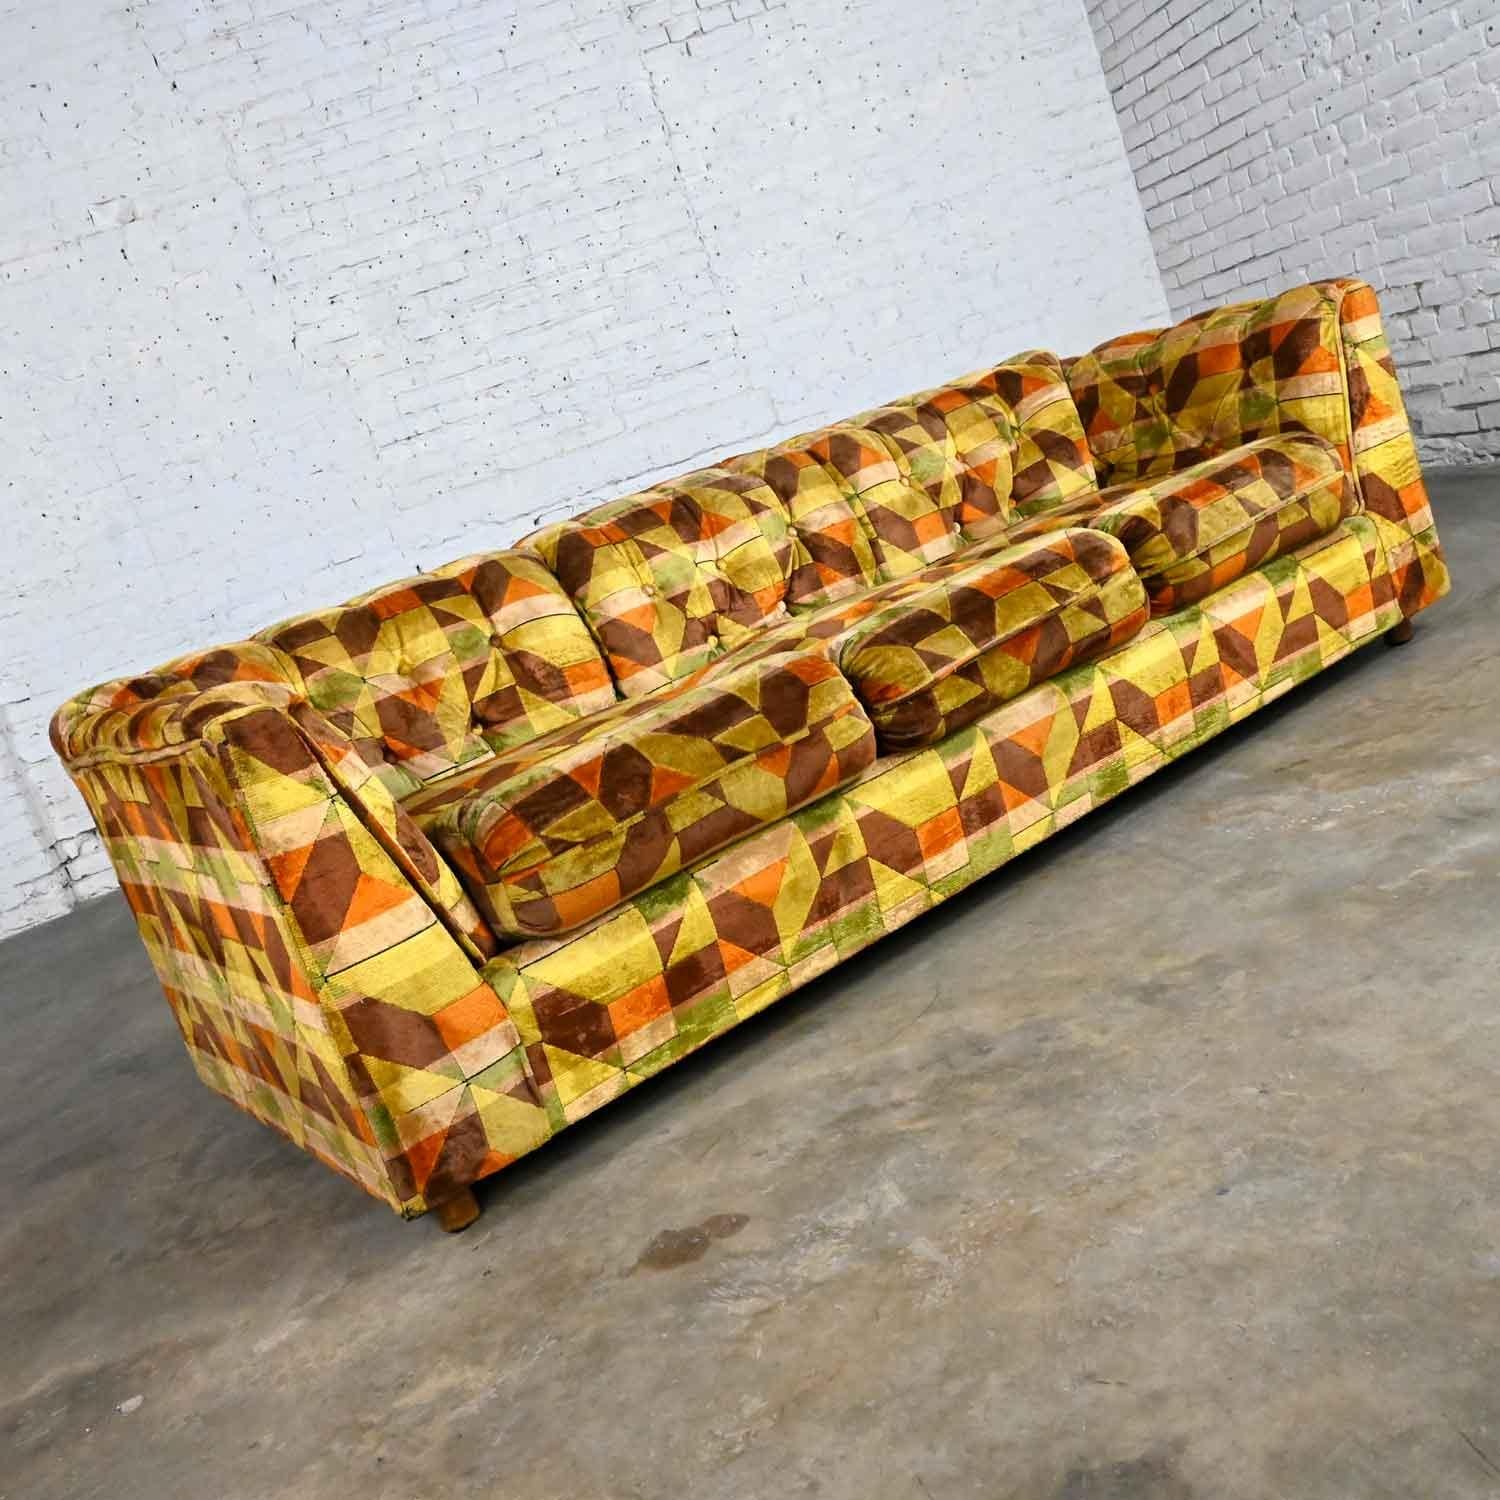 Awesome vintage Modern Kroehler multi color geometric pattern button tufted tuxedo style sofa. Beautiful condition, keeping in mind that this is vintage and not new so will have signs of use and wear. We did find a couple of wear spots on the fabric